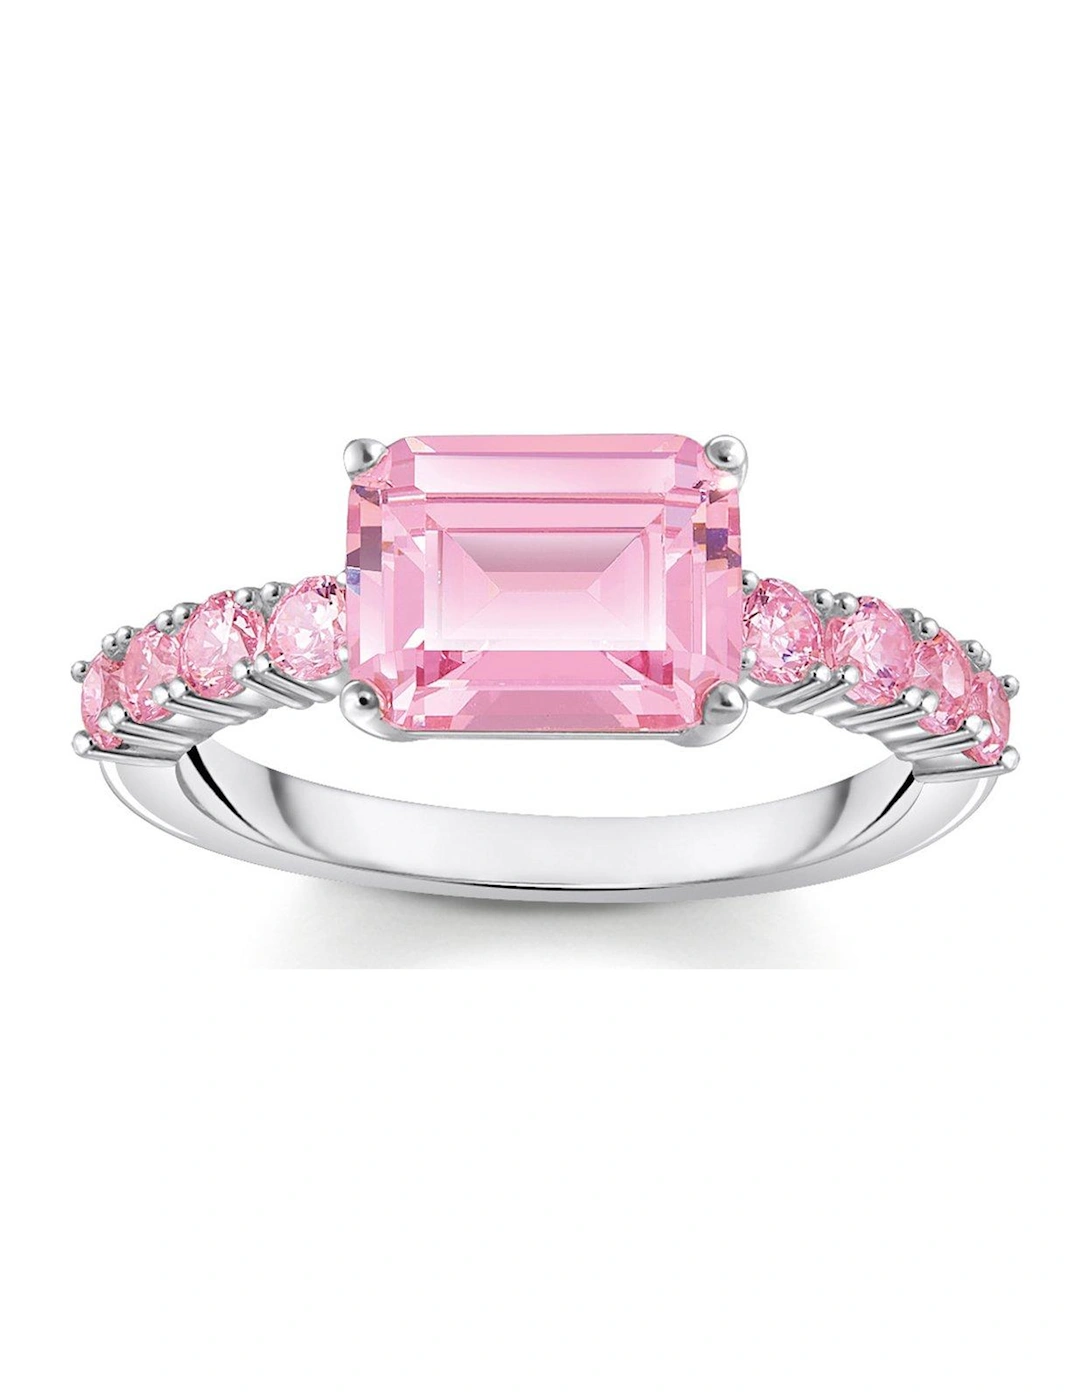 Heritage Glam Pink Solitaire Ring: 925 Silver and Pink Zirconia, 2 of 1